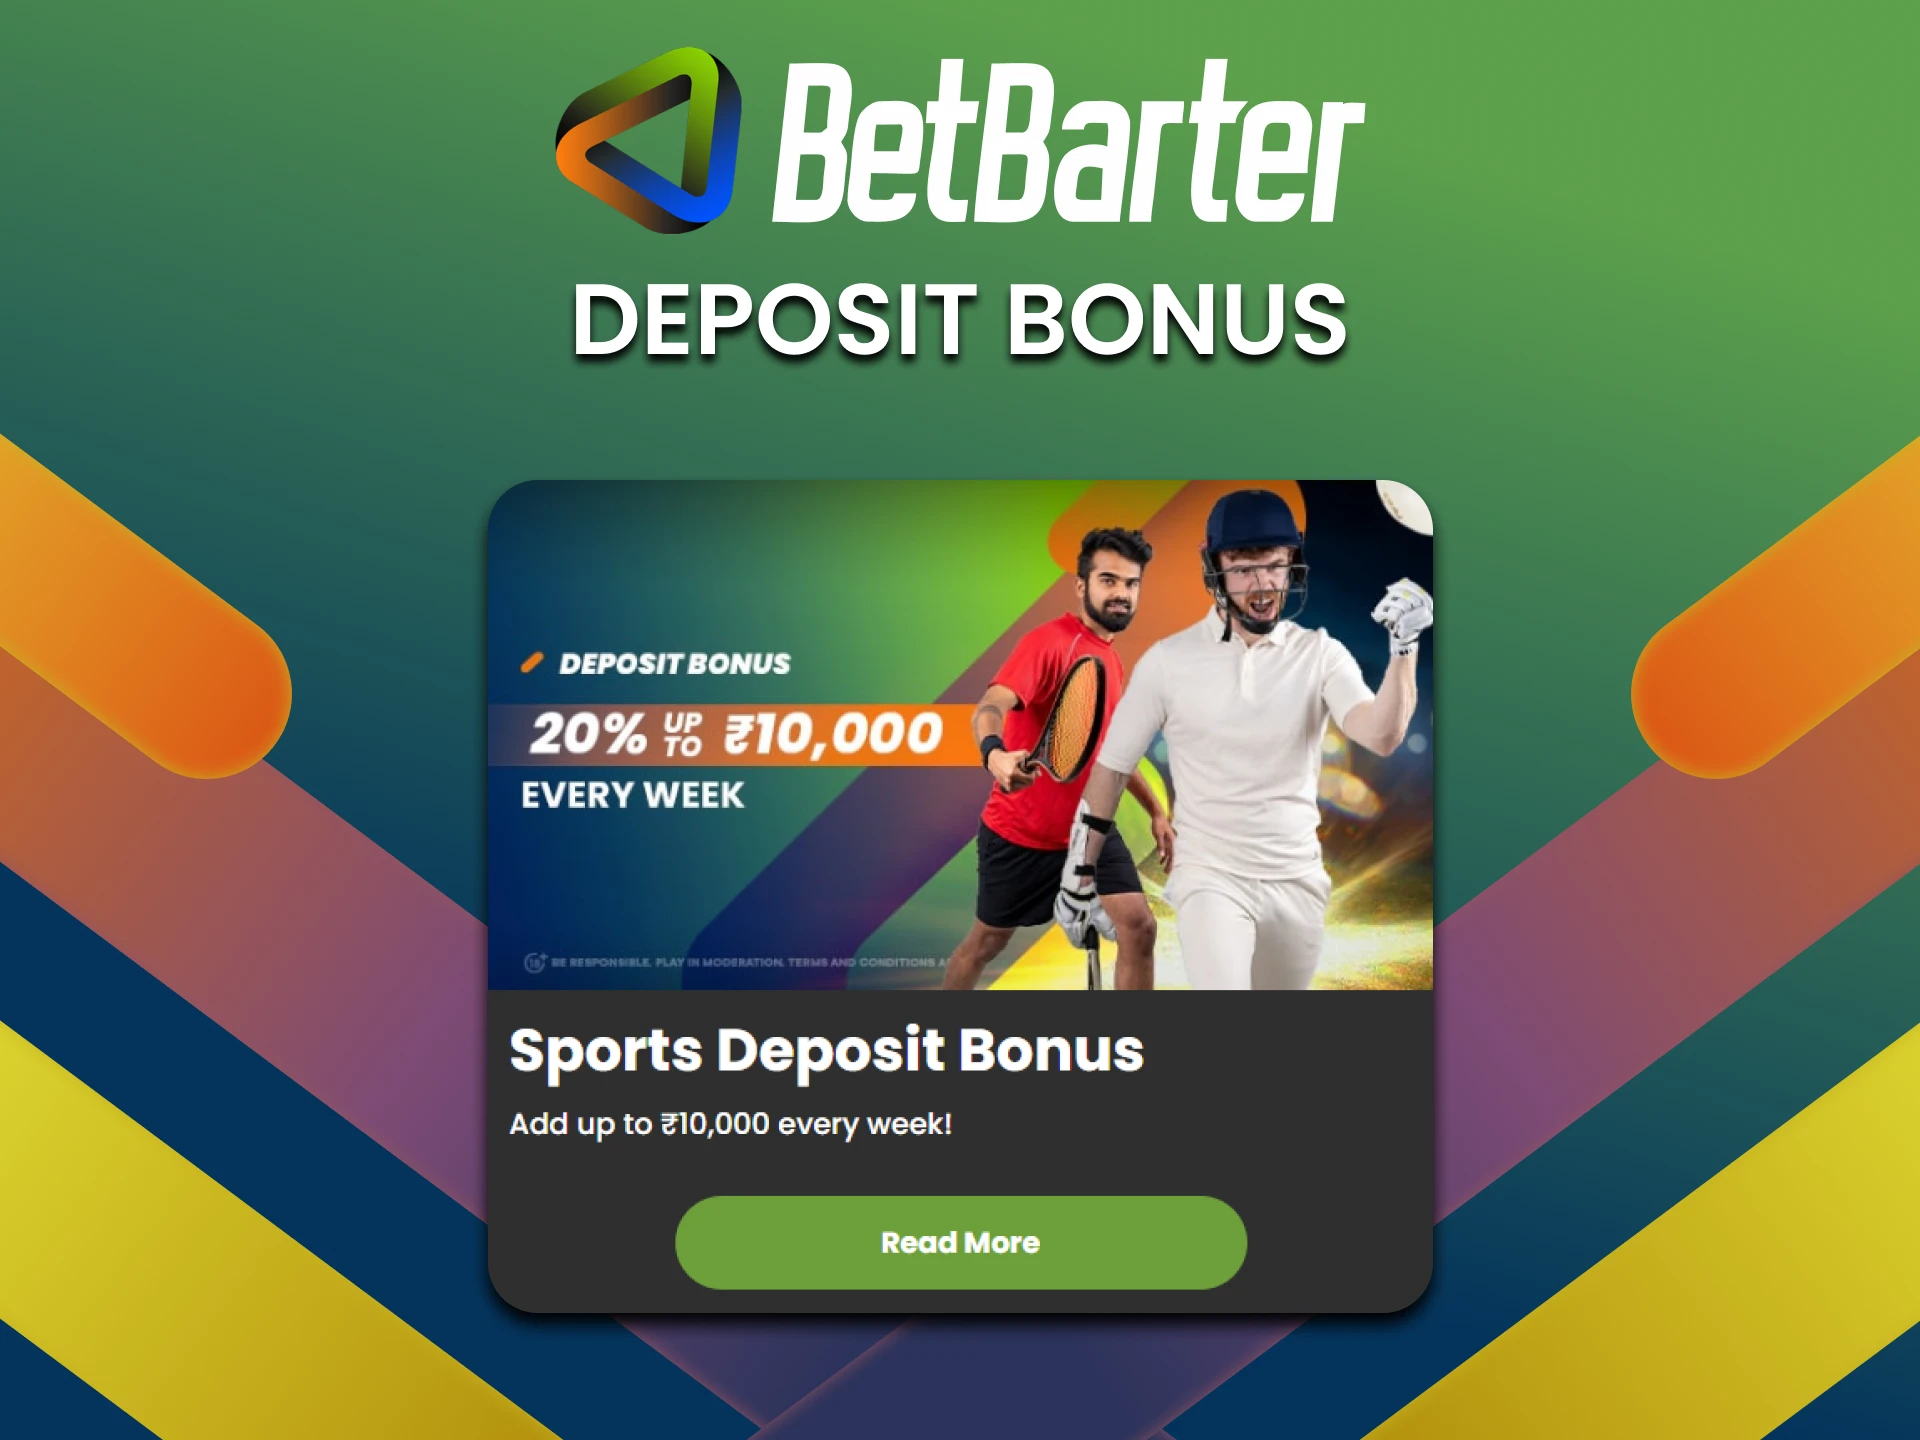 When you recharge, you will have a special offer available to your BetBarter virtual account.